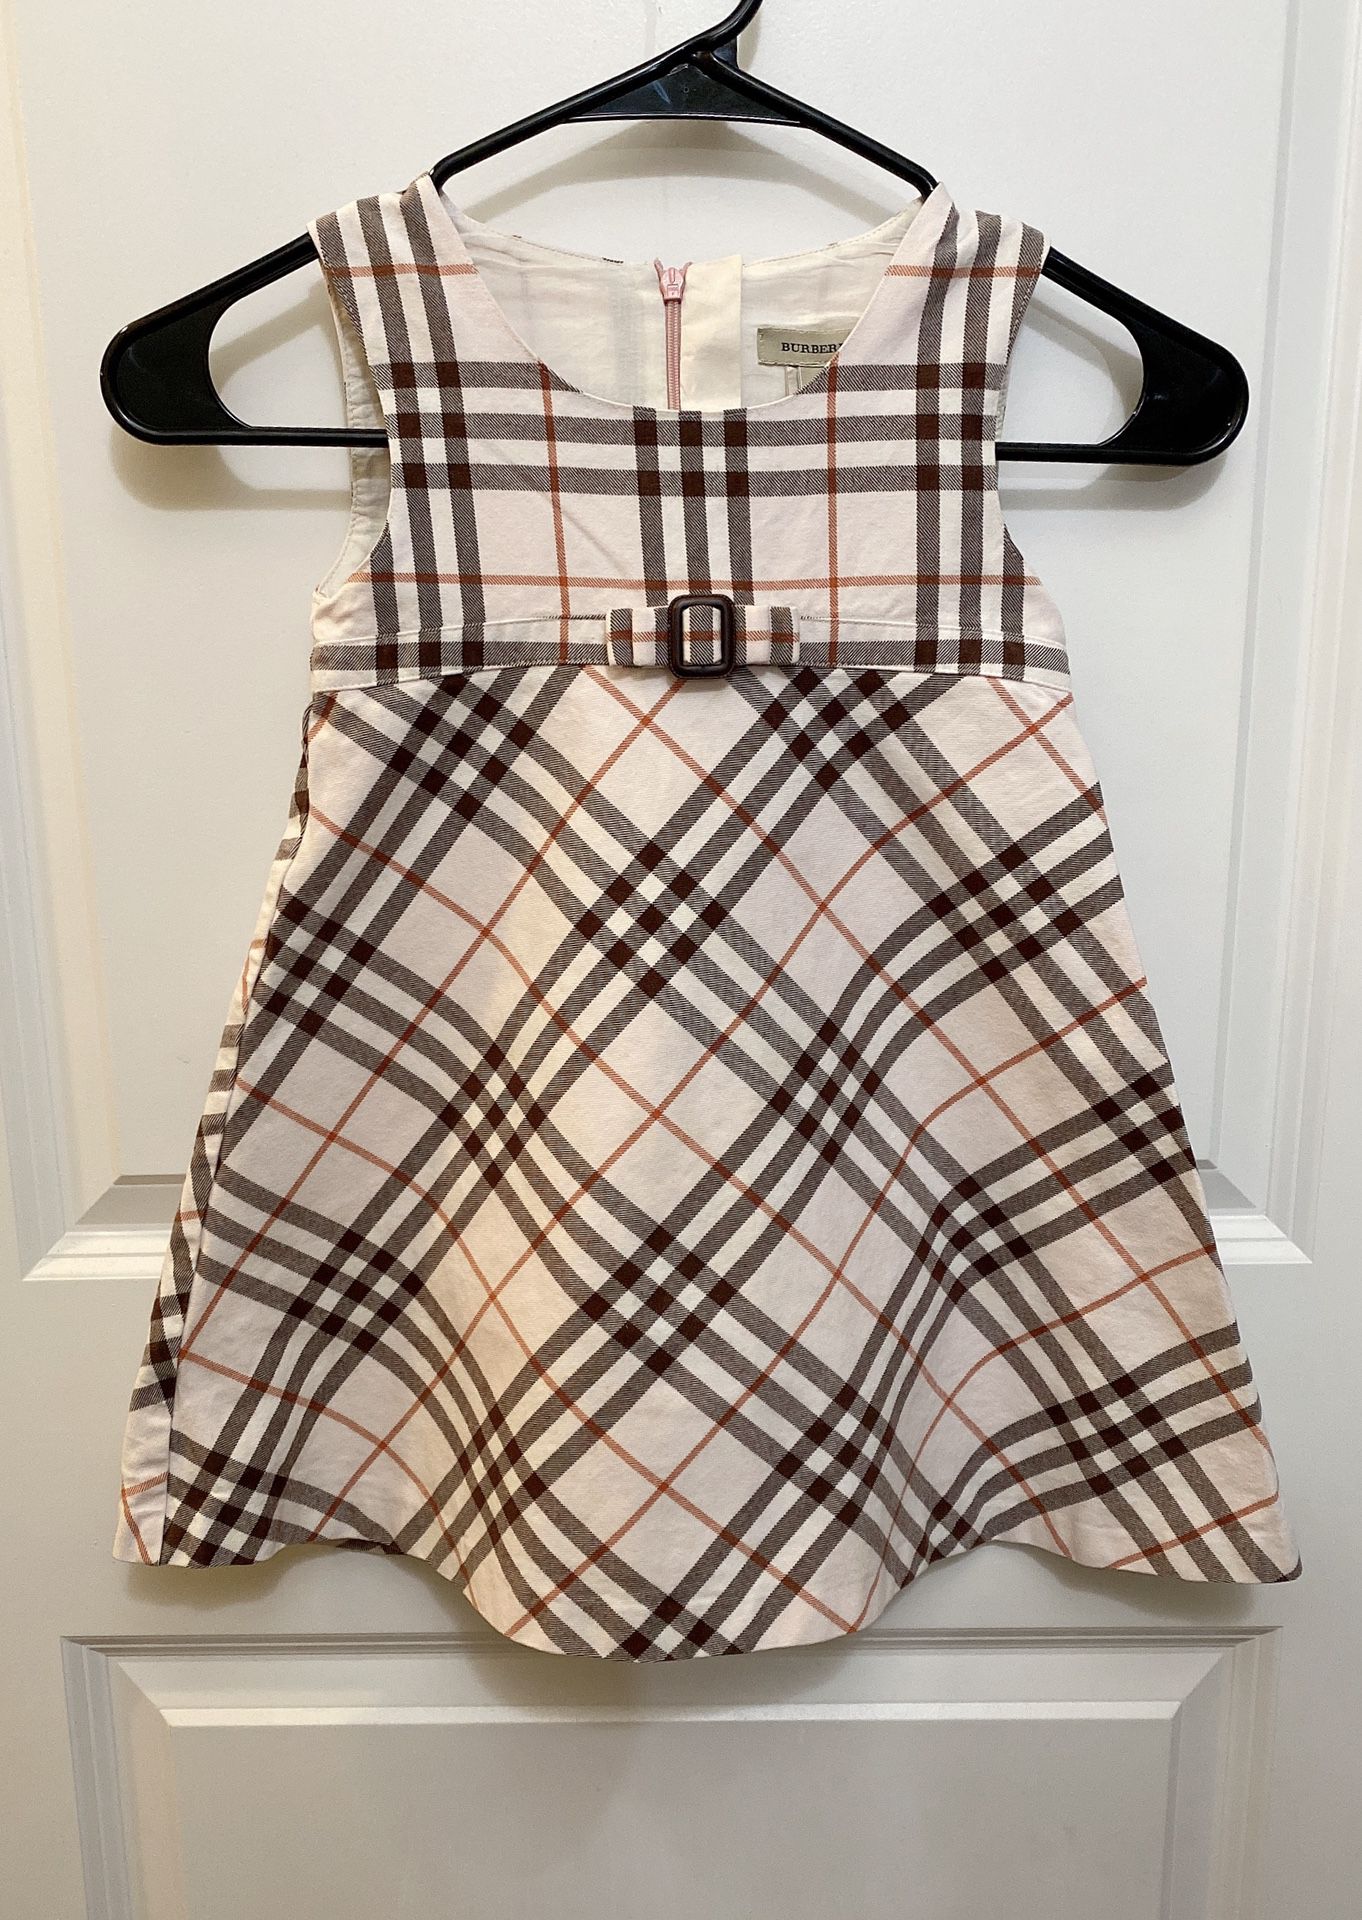 Burberry dress for girl 4Y